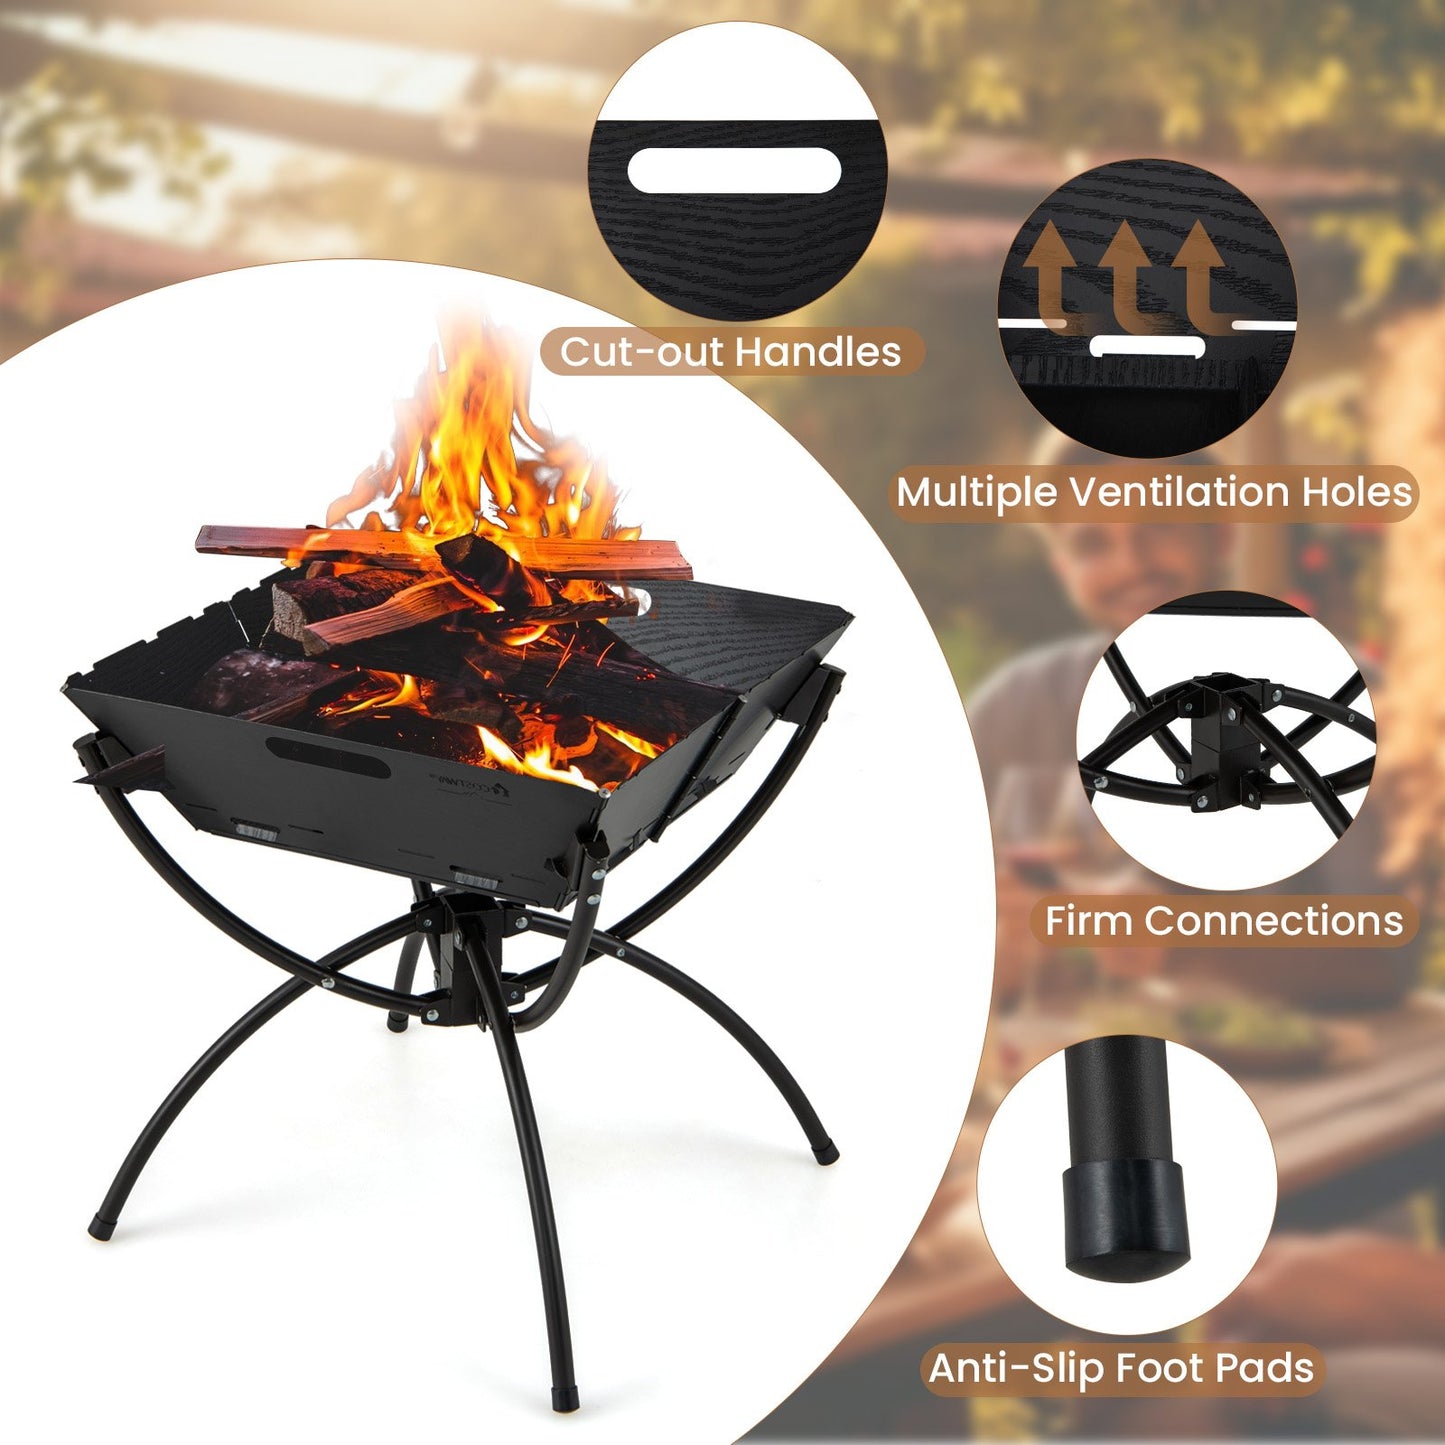 3-in-1 Camping Campfire Grill with Stainless Steel Grills Carrying Bag & Gloves, Black